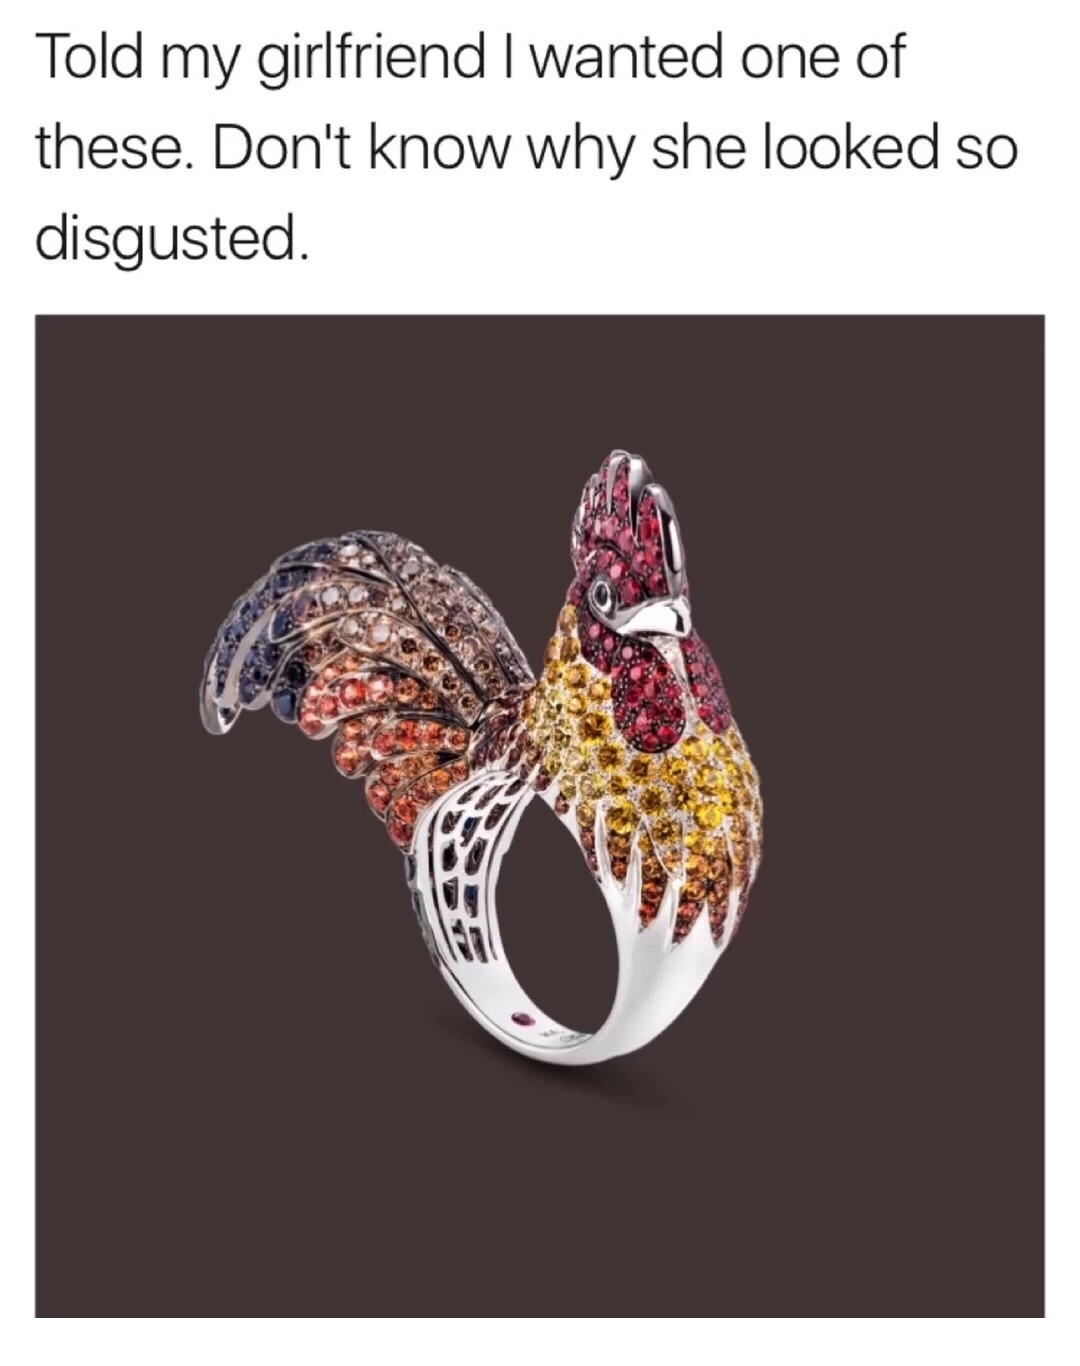 meme - jewellery - Told my girlfriend I wanted one of these. Don't know why she looked so disgusted.